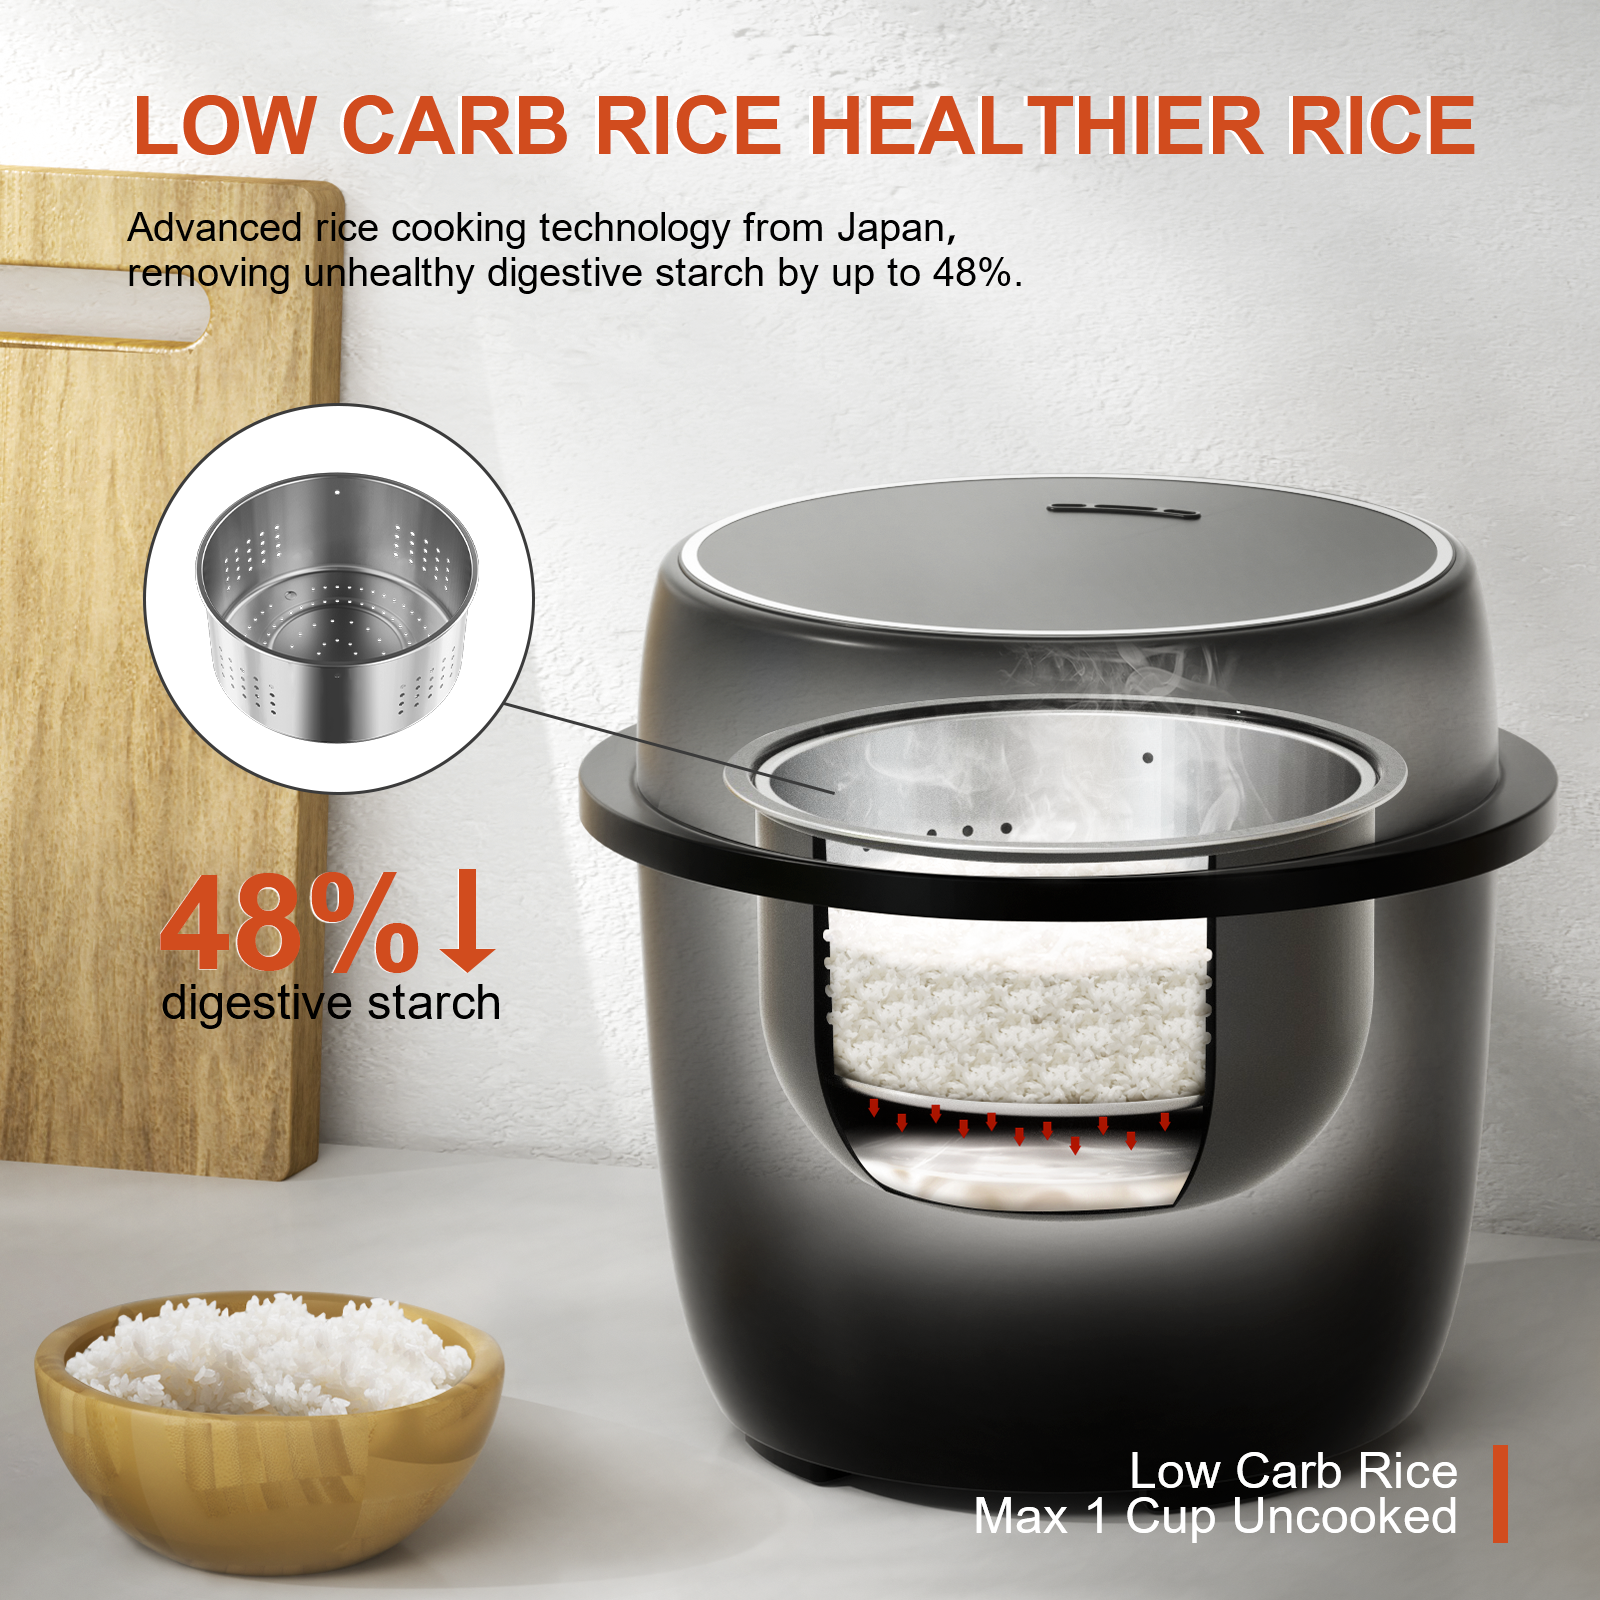 Rice Cooker Small Low Carb, YOKEKON 6-cup (cooked) Rice Cooker with Stainless Steel Steamer, 8-in-1 Rice Maker, Delay Timer and Auto Keep Warm Feature, Sushi, Risitto, Steamer, Cake, Black